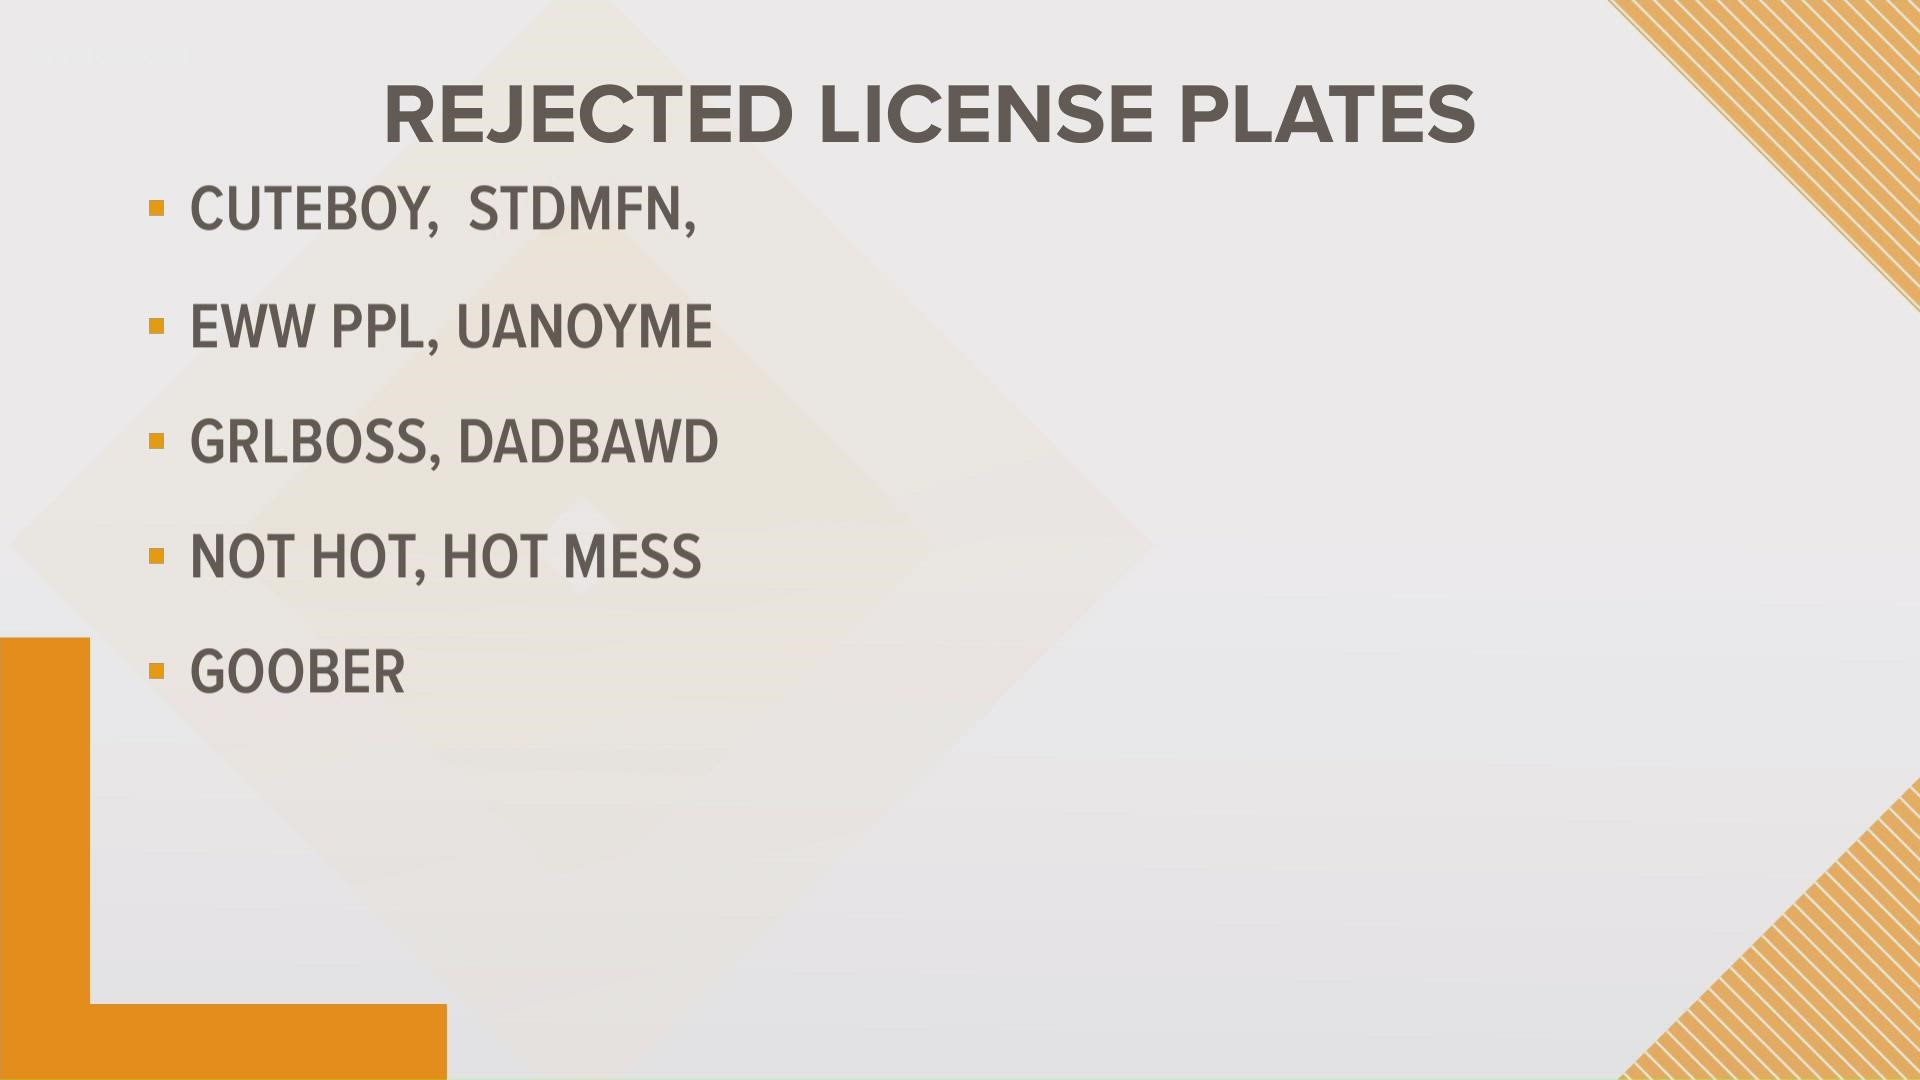 The Texas DMV rejected thousands of personalized license plate requests in 2021. We took a look at some of the standouts that the DMV rejected.